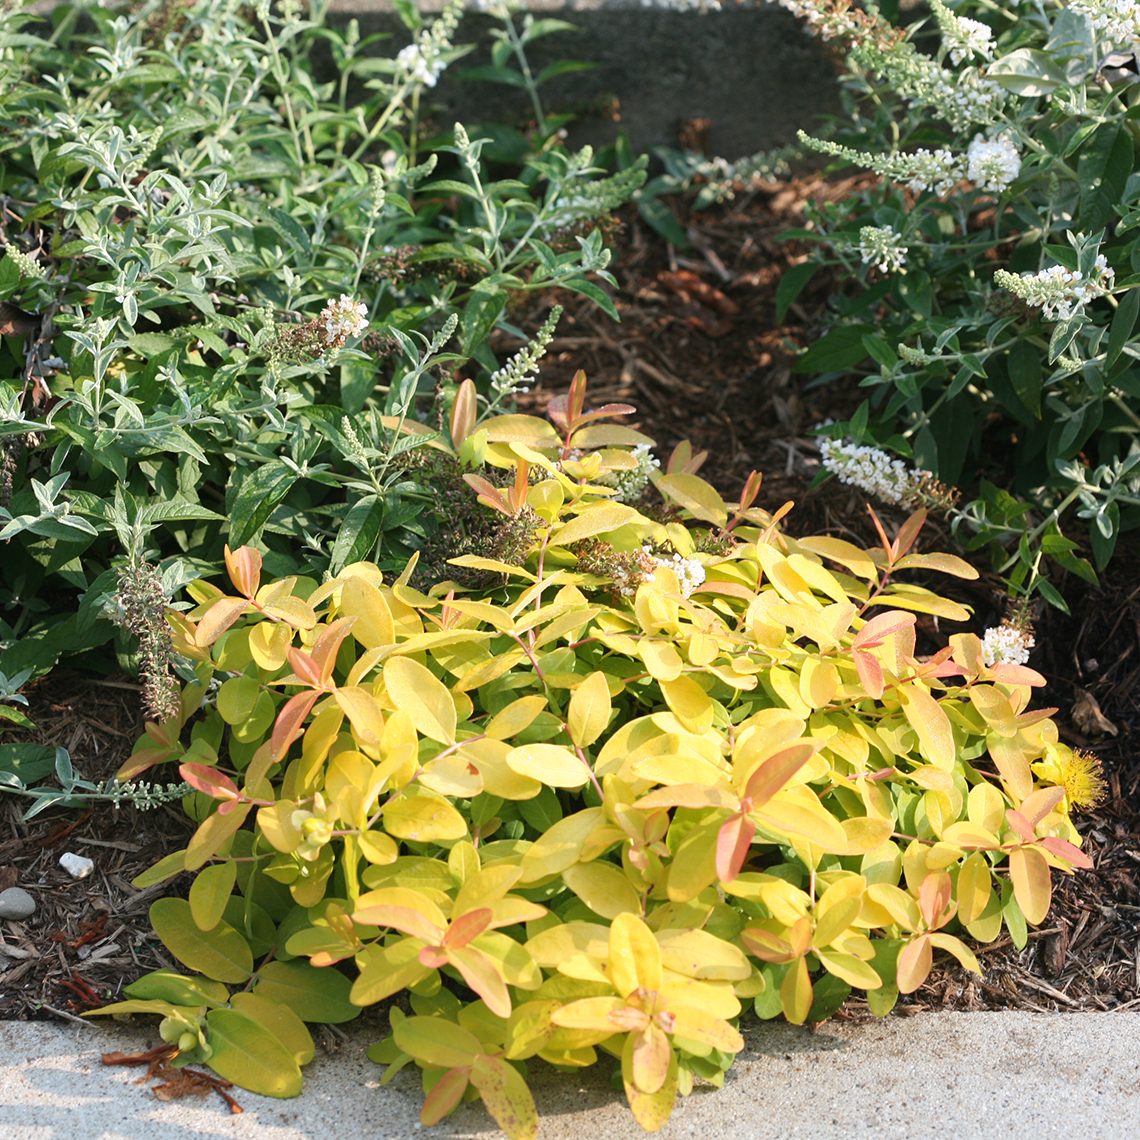 A neat specimen of Golden Rule hypericum in a landscape displaying its bright yellow foliage and ground covering habit